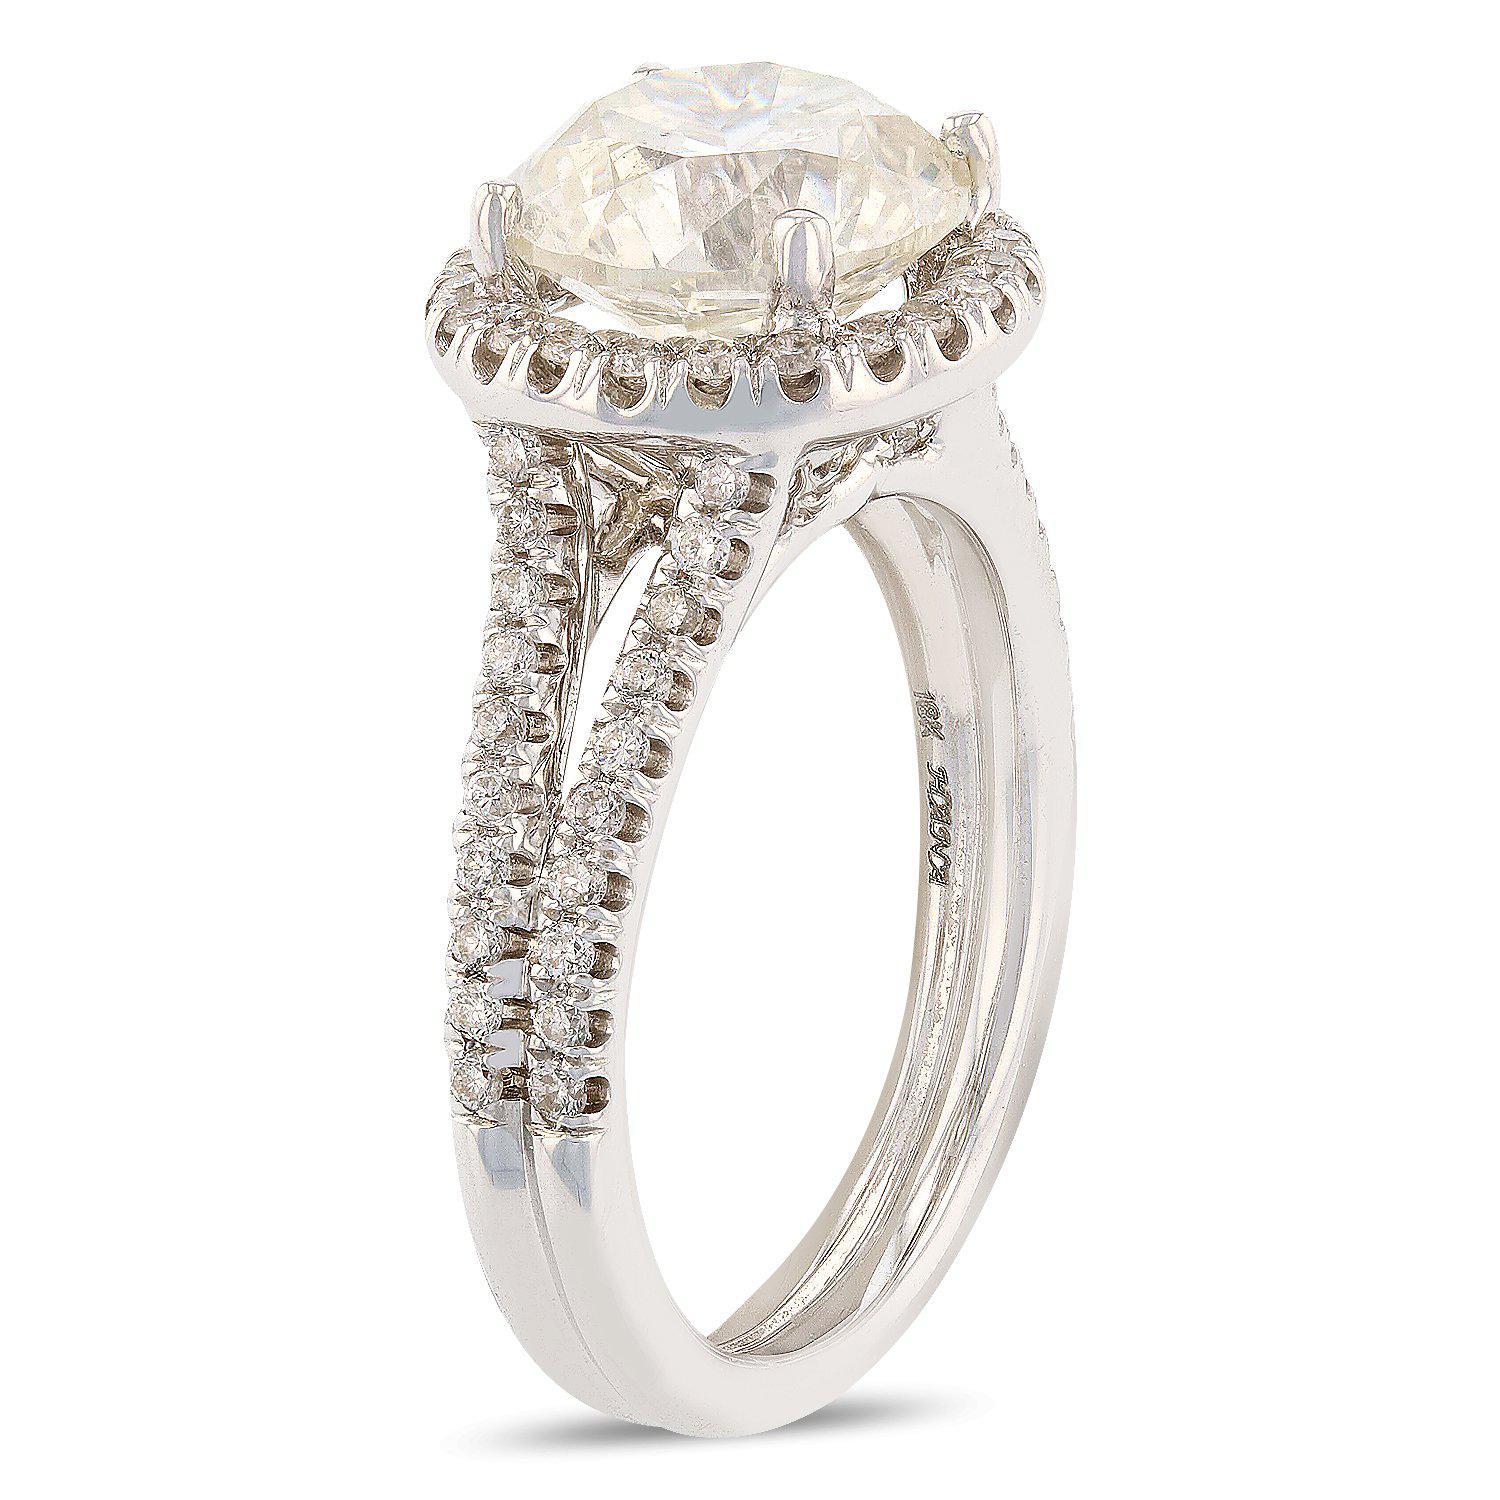 One electronically tested 18KT white gold ladies cast diamond unity ring with a bright polish finish. The featured diamond is set within a diamond bezel supported by a diamond accented under gallery and diamond set split shoulders, completed by a